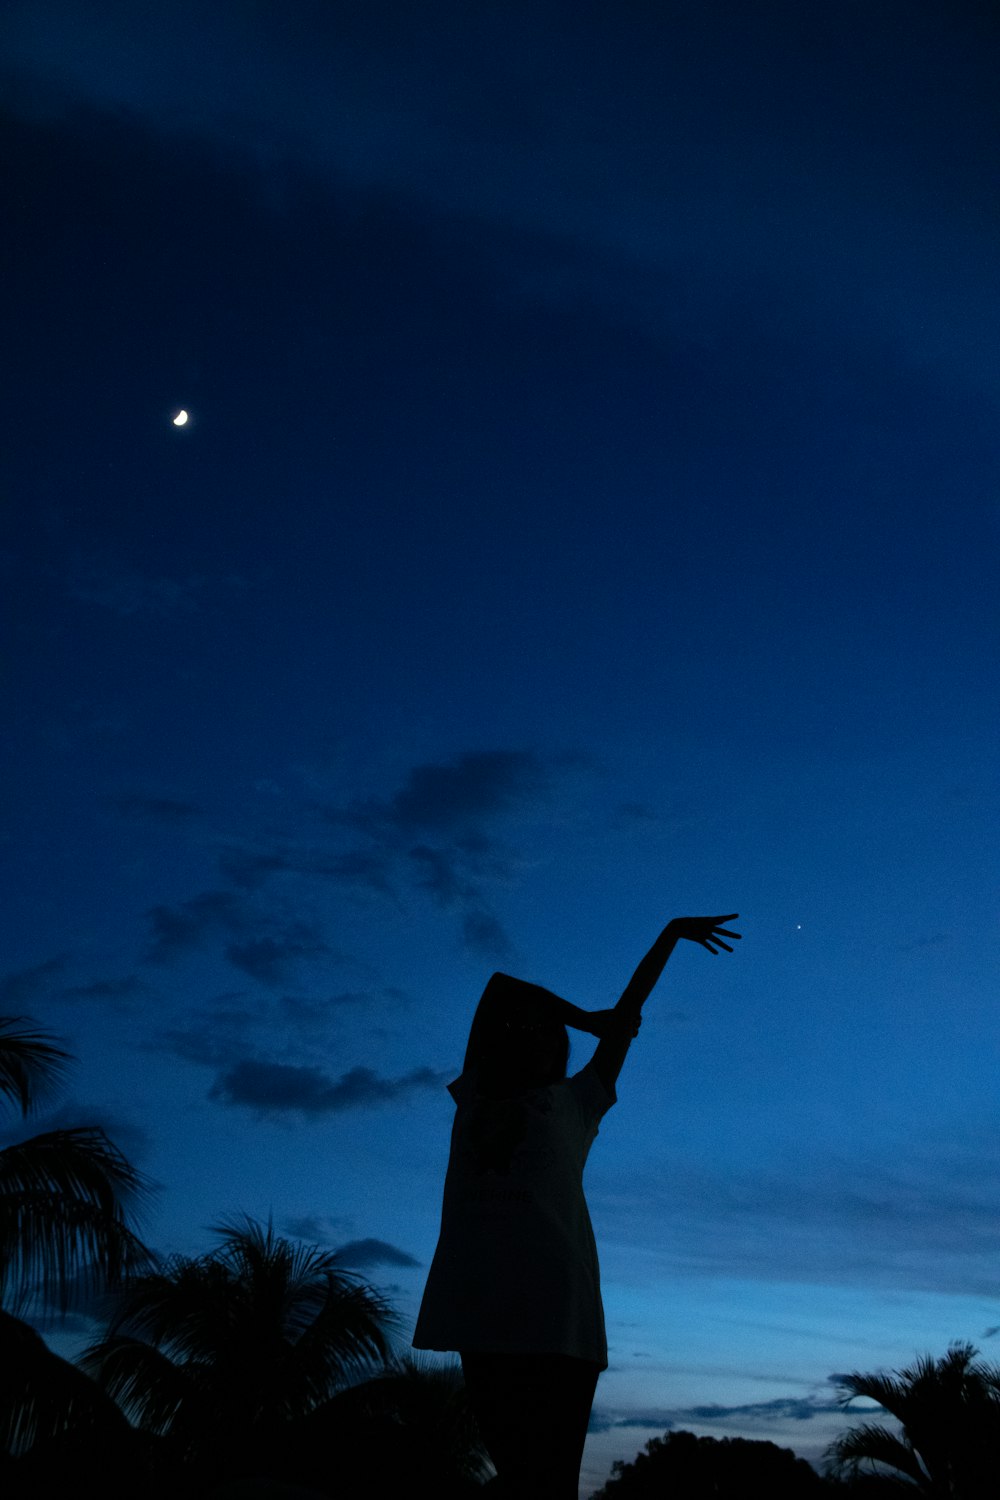 a woman reaching up into the sky at night